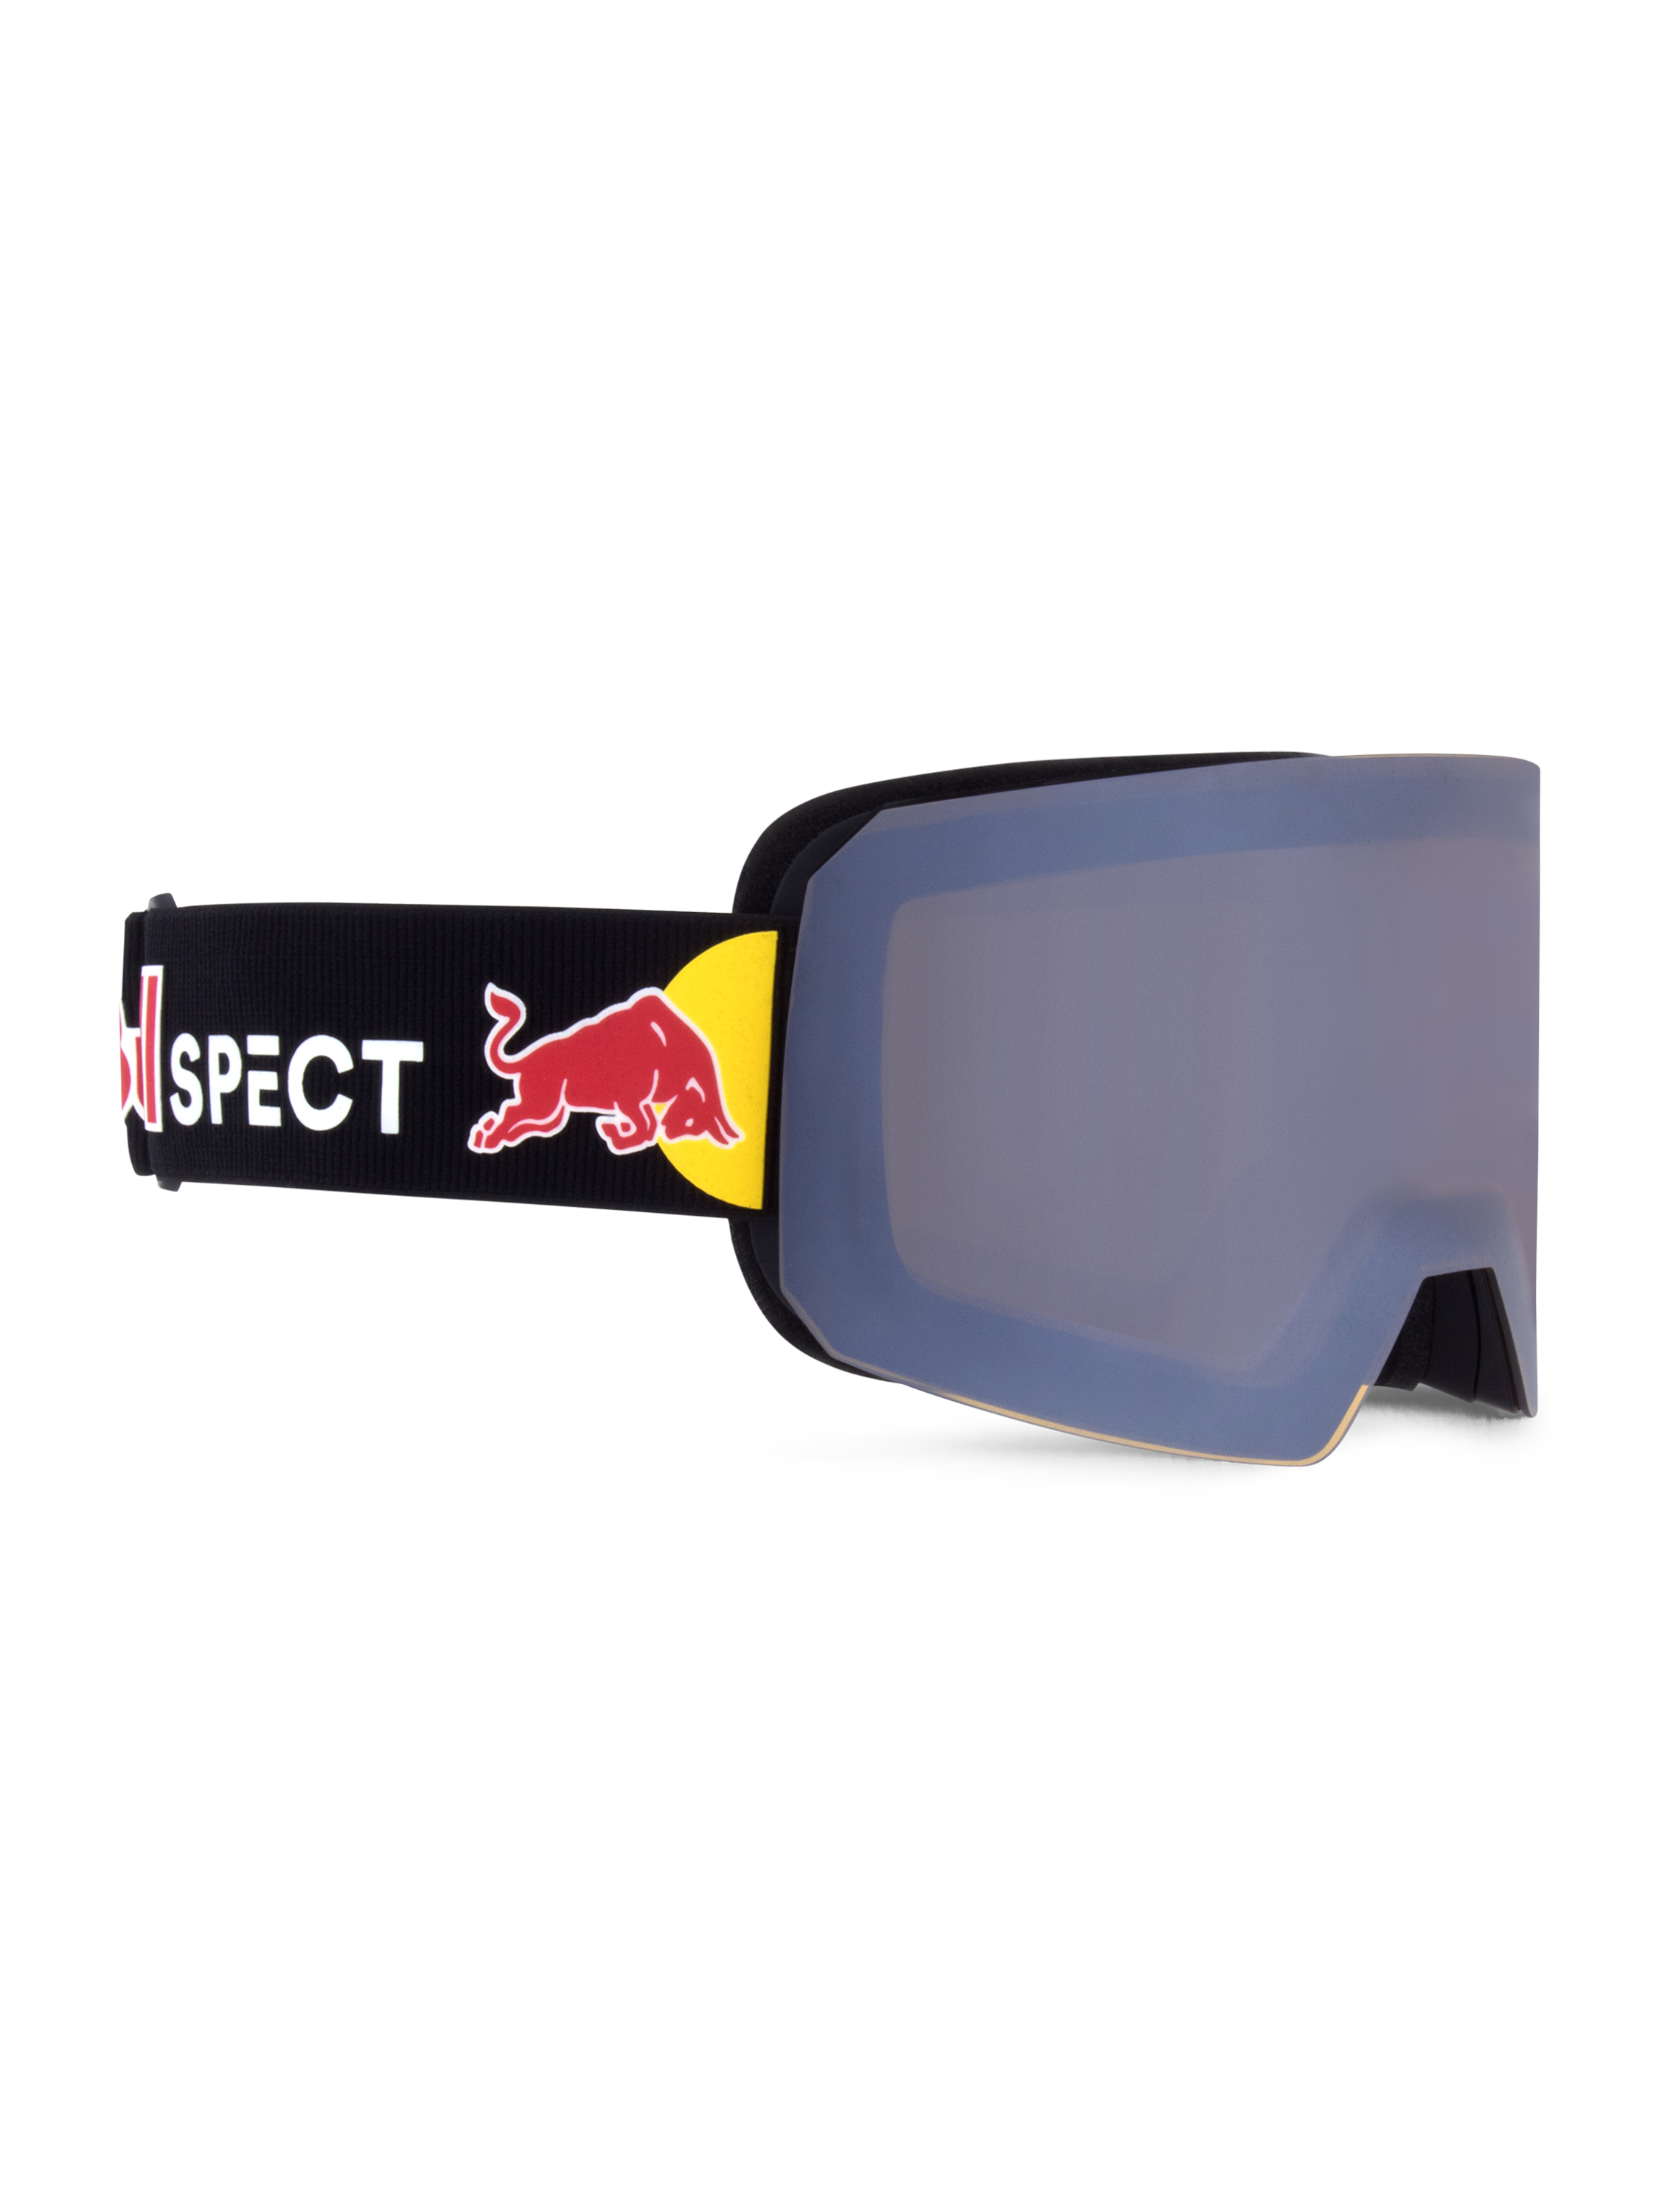 Red Bull Spect LINE-01 Goggles